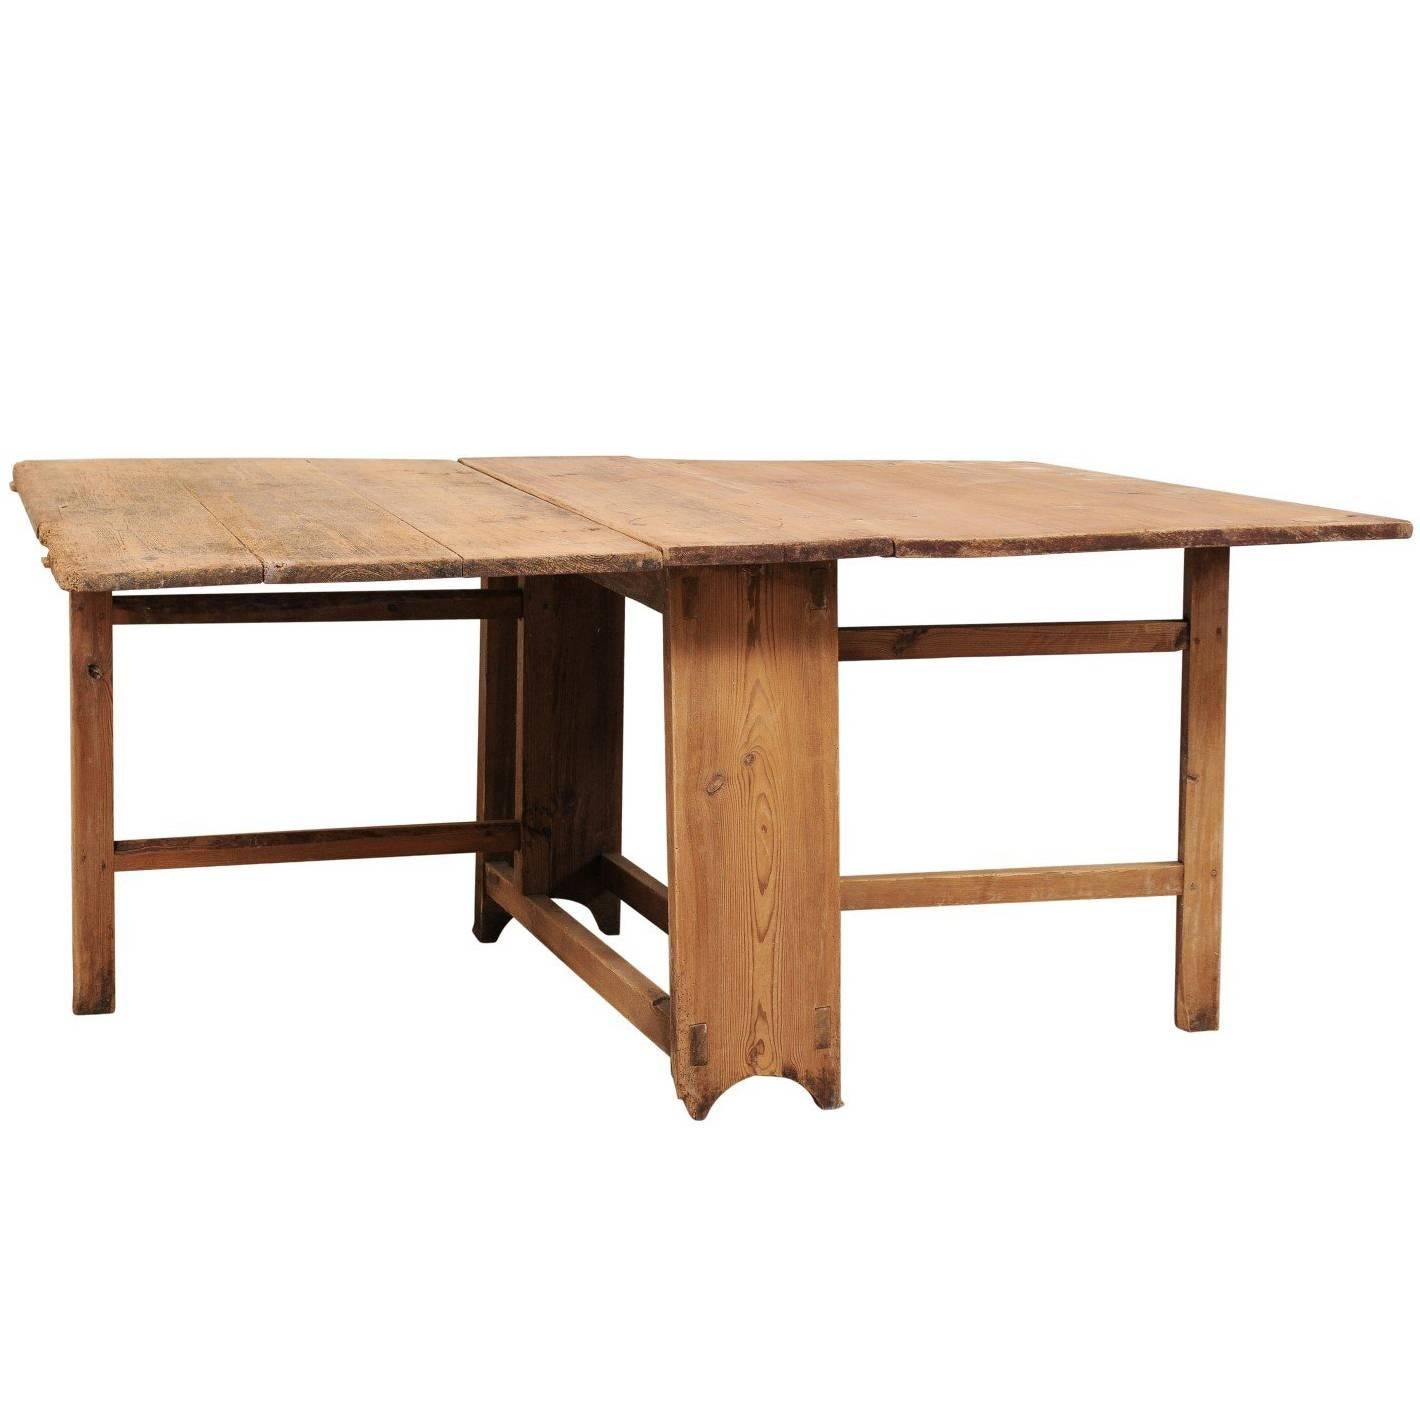 Swedish Early 19th Century Drop-Leaf / Gate Leg Table with Original Wood Finish For Sale